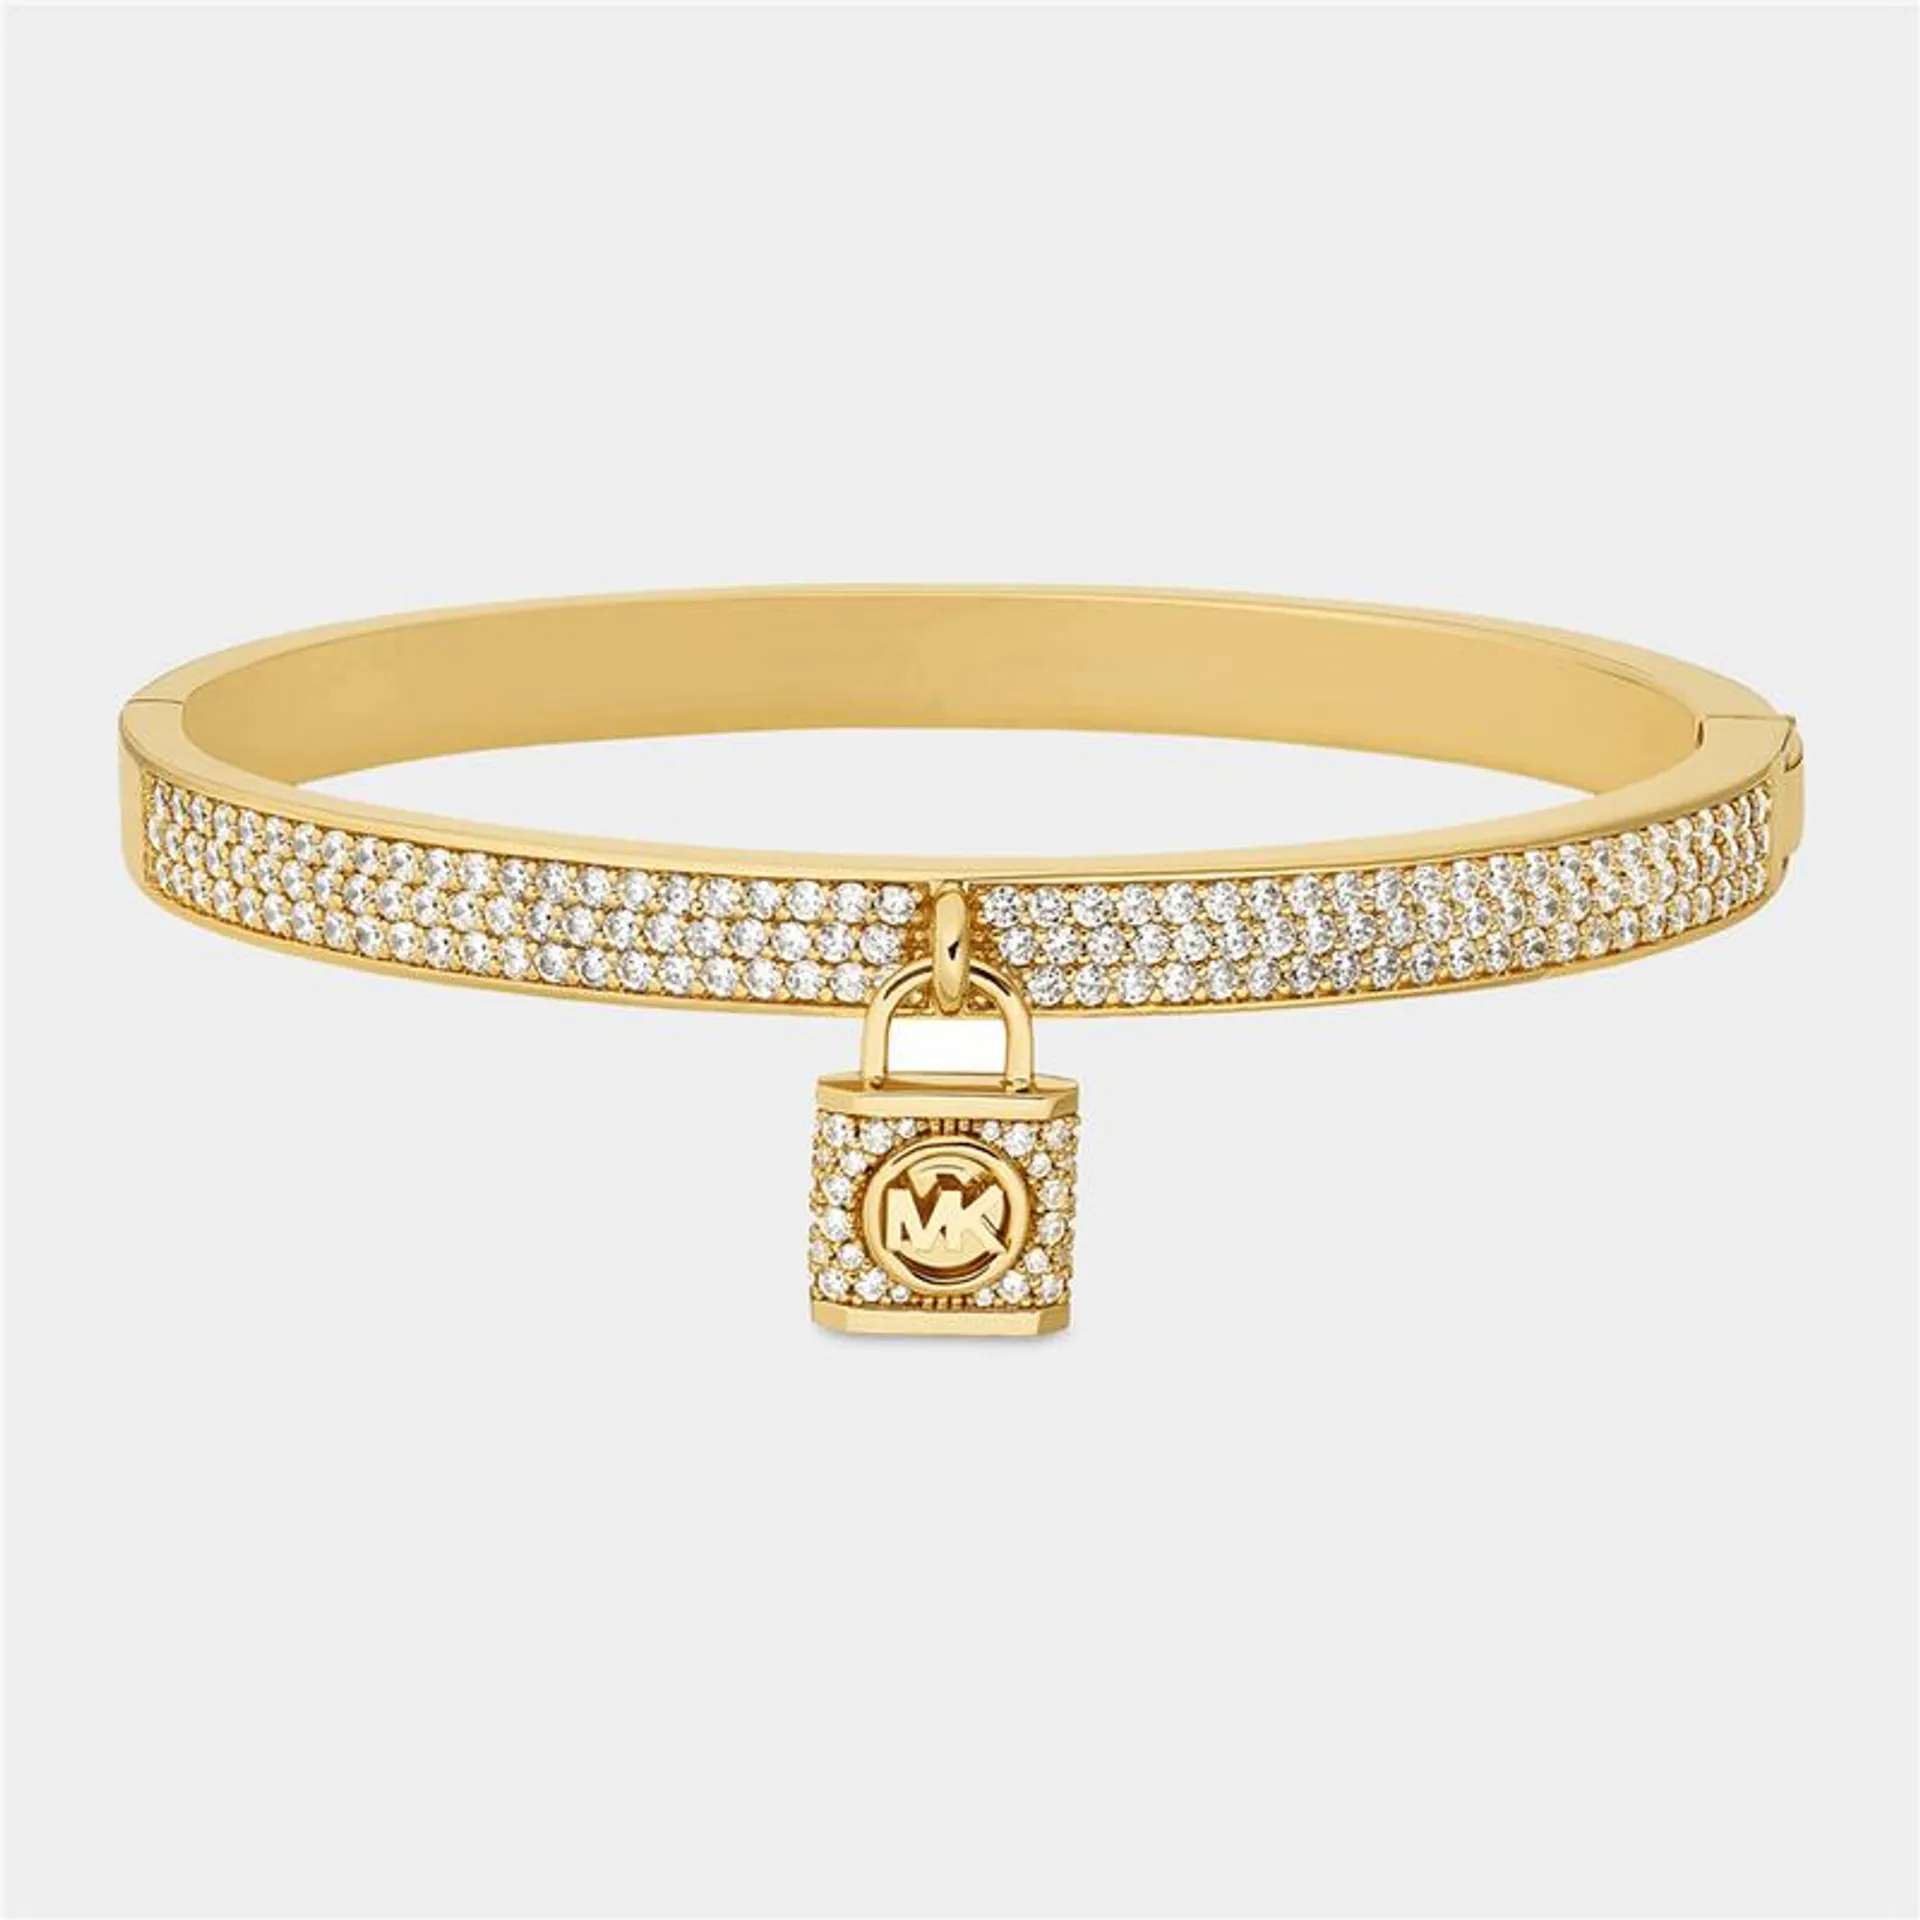 Michael Kors Metallic Muse Collection Gold Plated Cubic Zirconia Charm Bangle Bracelet